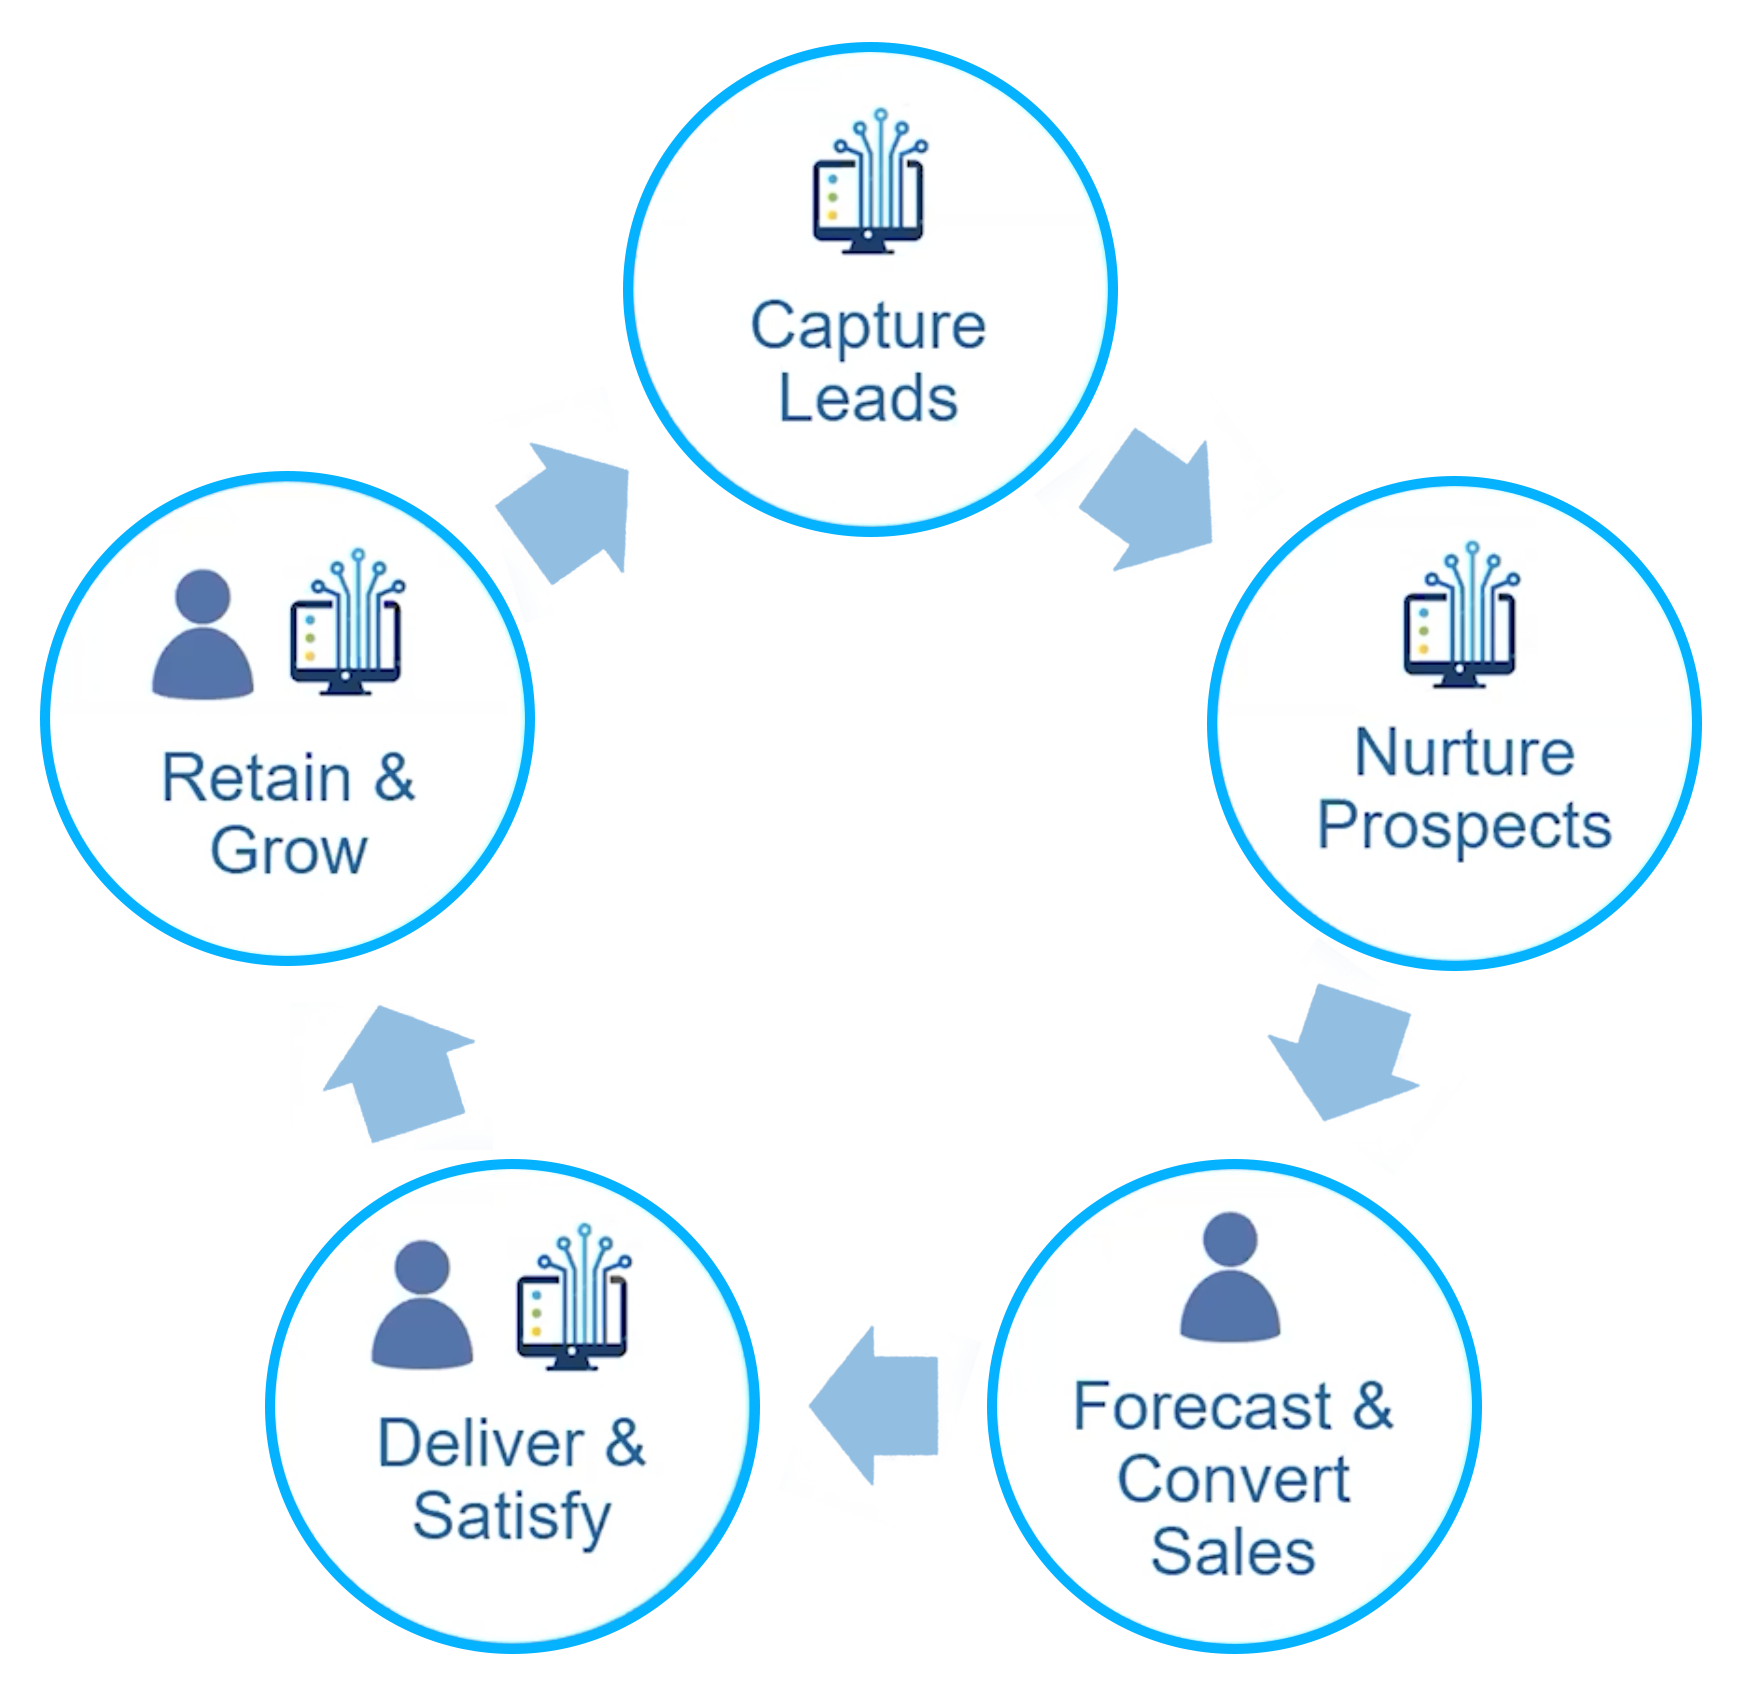 Capture leads, nurture prospects, forecast and convert sales, deliver and satify, retain and grow leads